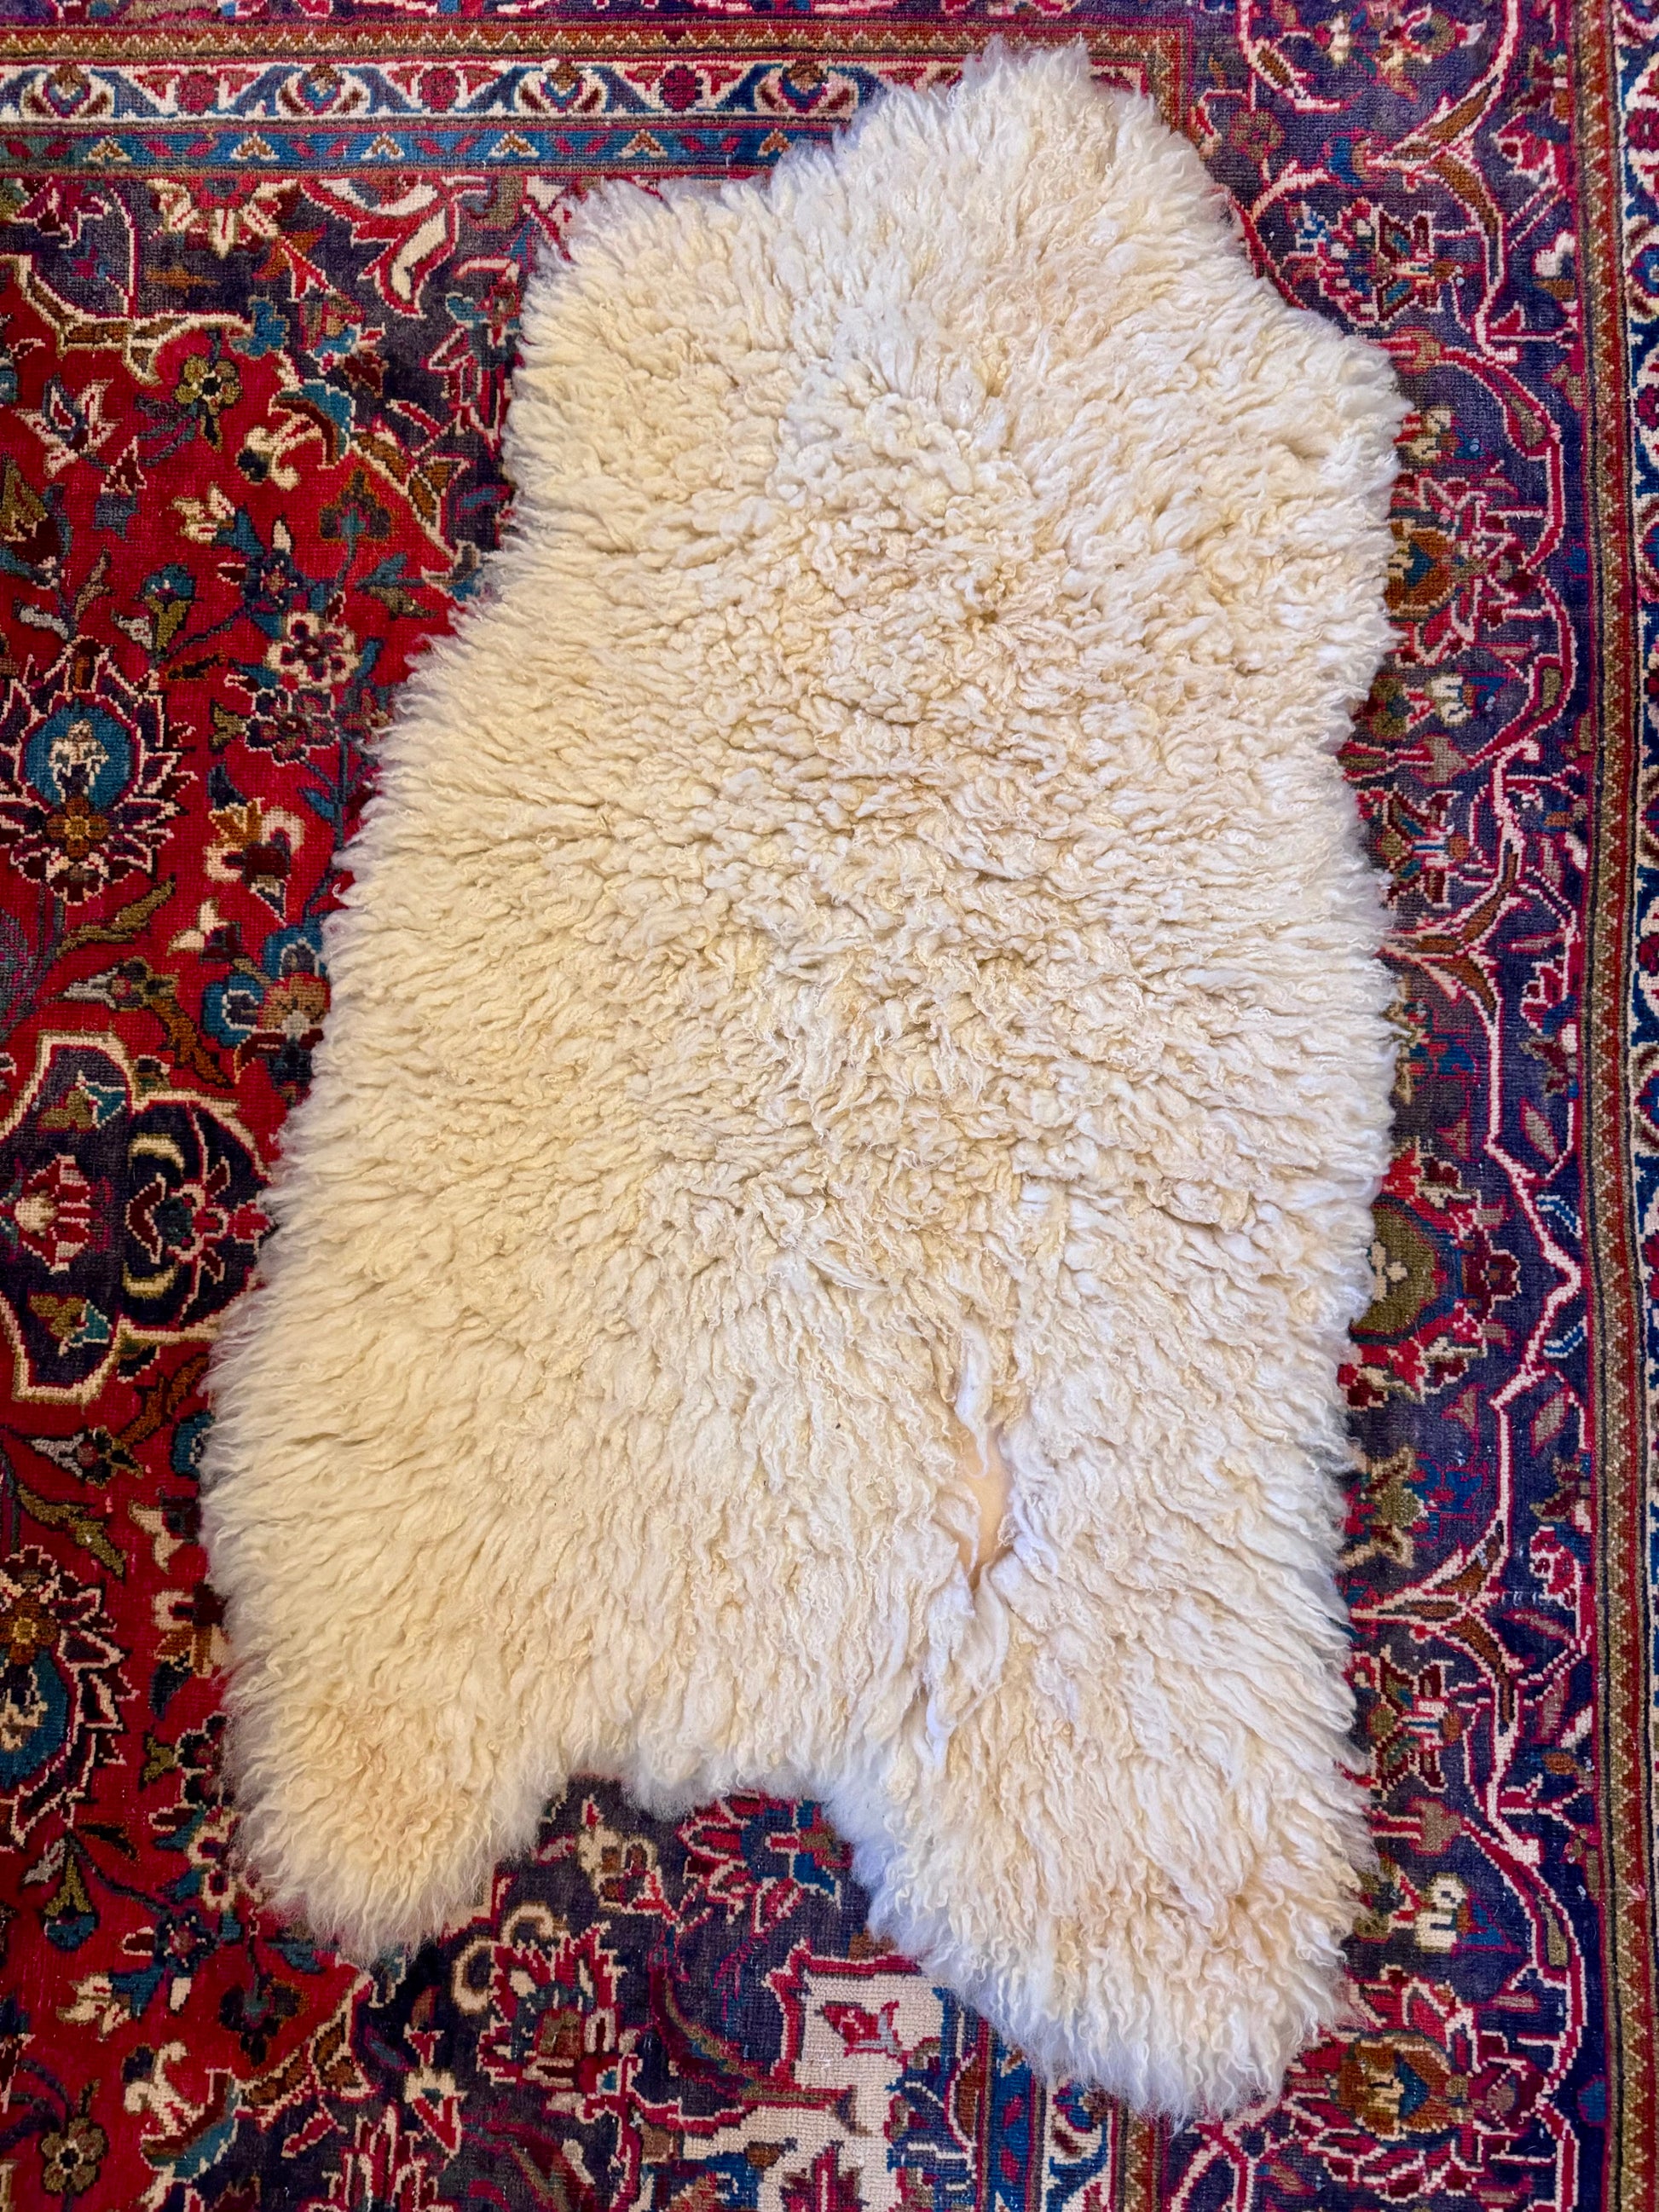 PELT G - has a little bald spot where leather shows through. Natural characteristic of a real pelt. 